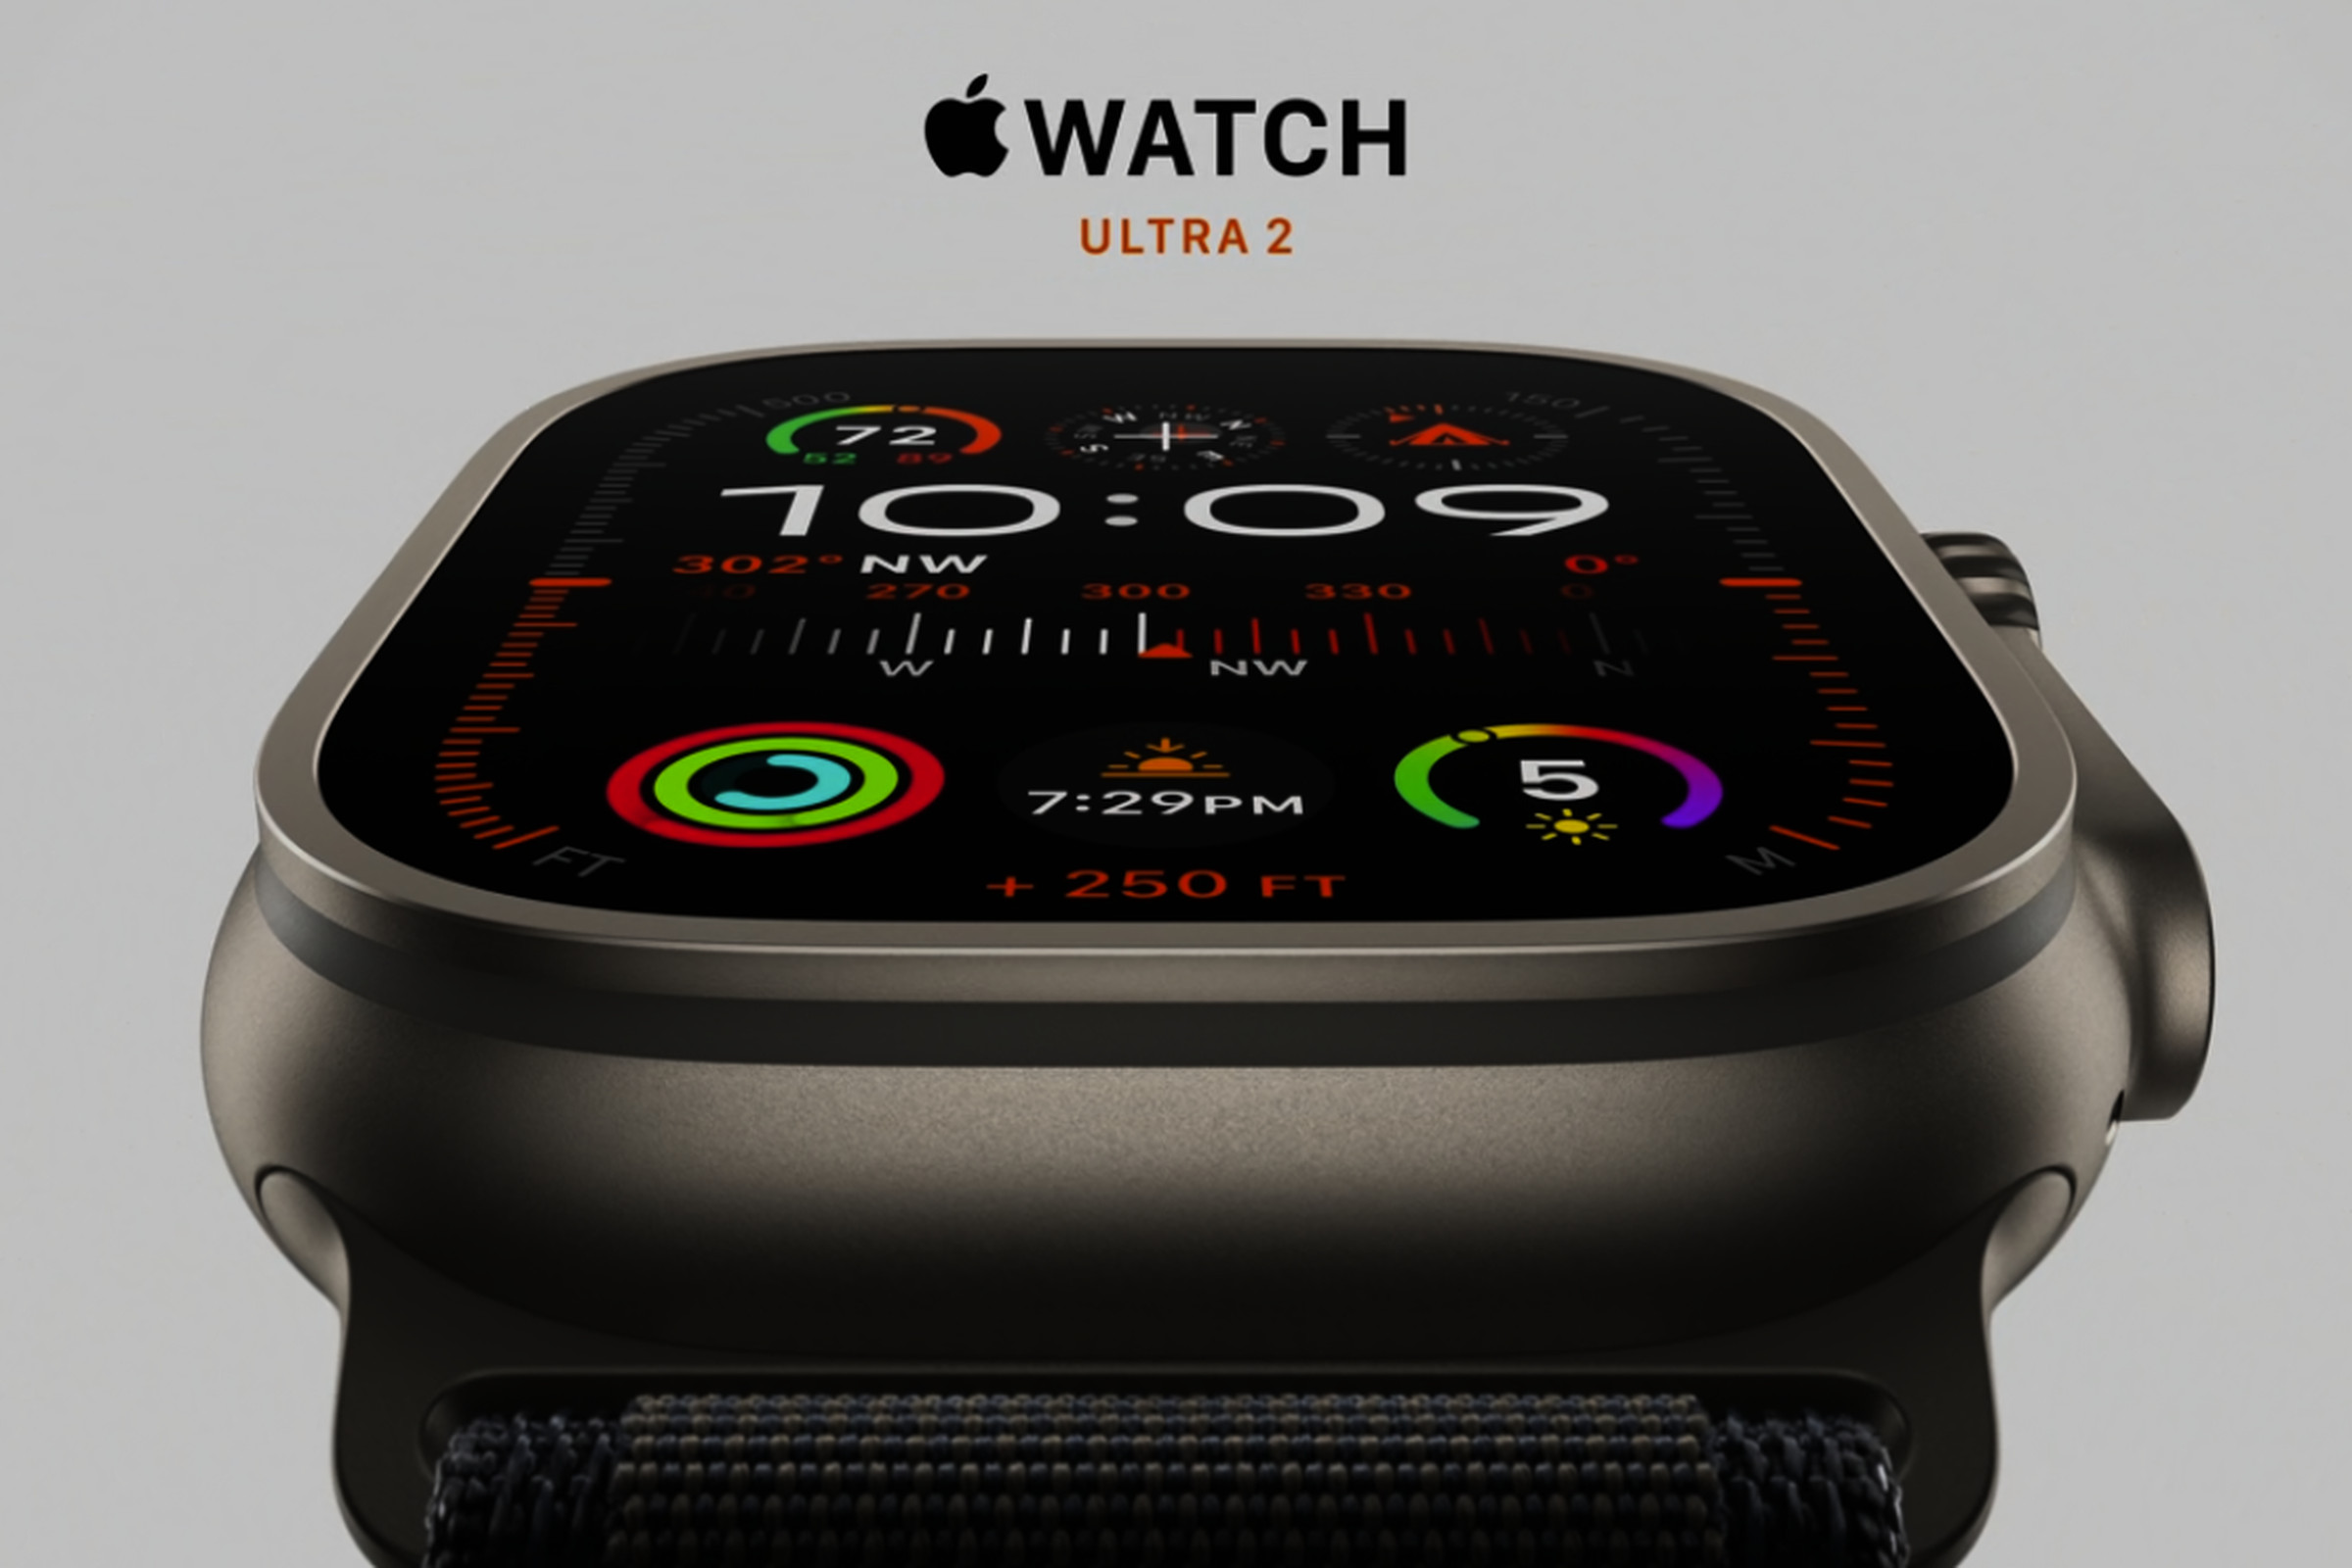 The Apple Watch Ultra 2 on a gray background with Watch Ultra 2 written above.